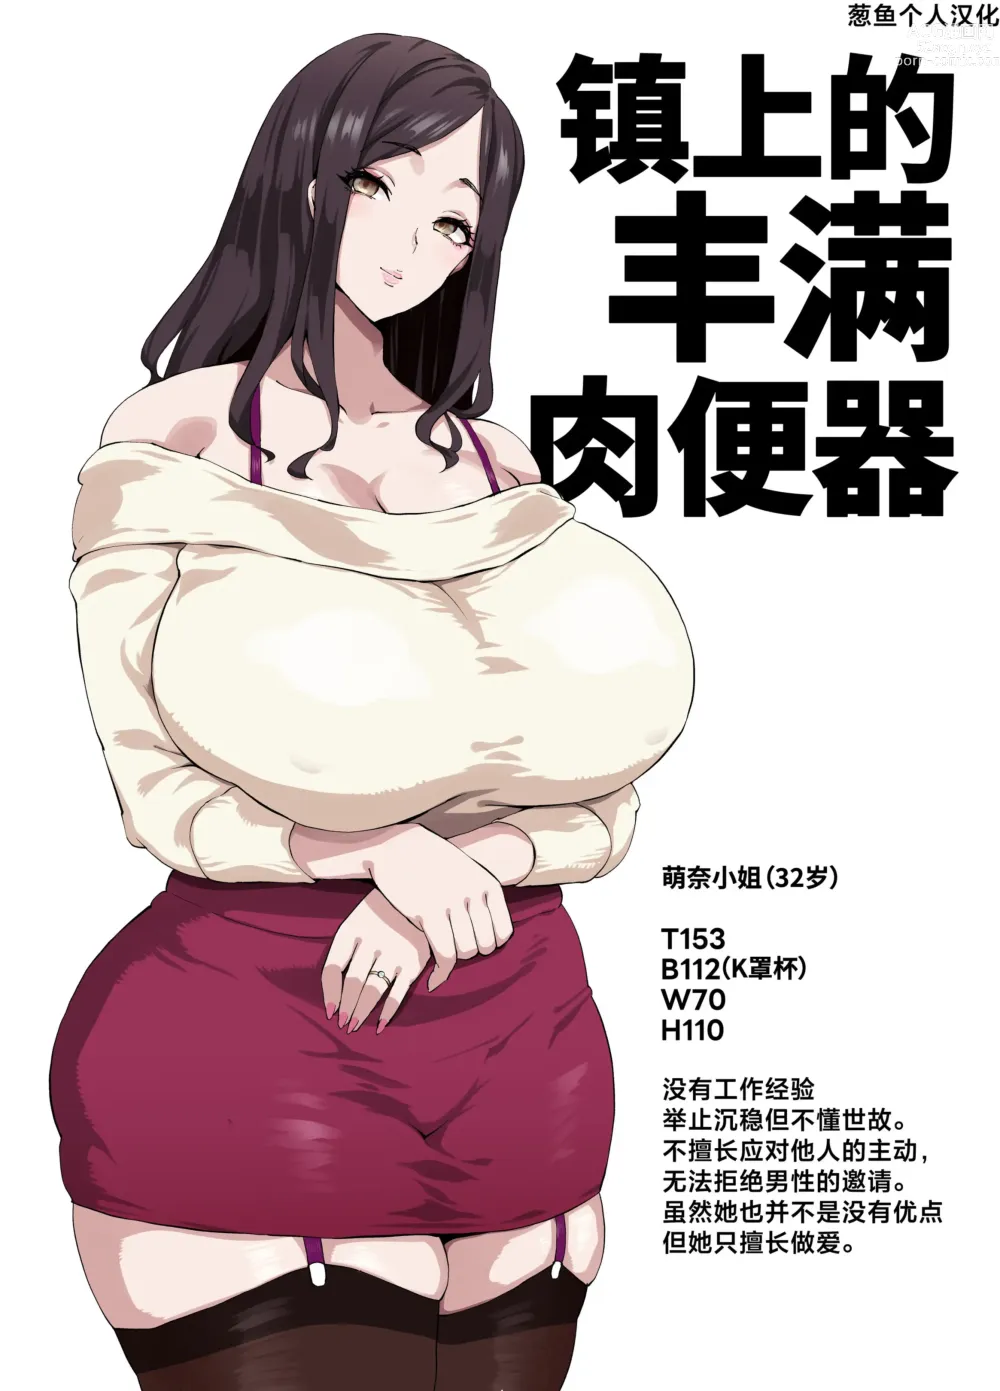 Page 1 of doujinshi 镇上的丰满肉便器